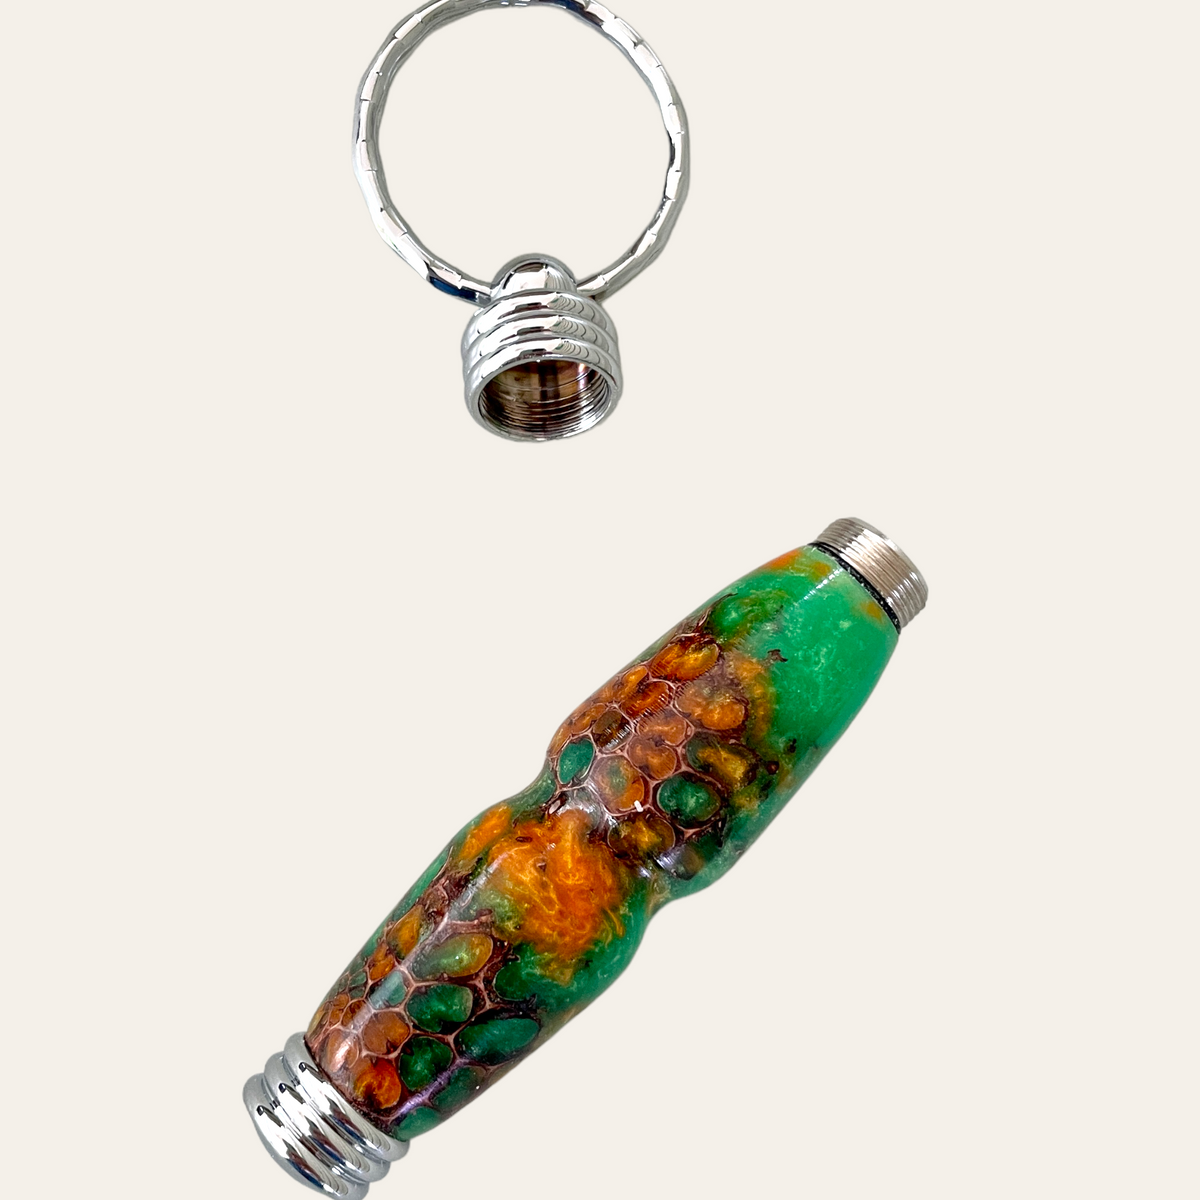 Resin Secret Compartment Hand Turned Key Chain- Sweet Gum Pod Key Chain Paul's Hand Turned Creations   